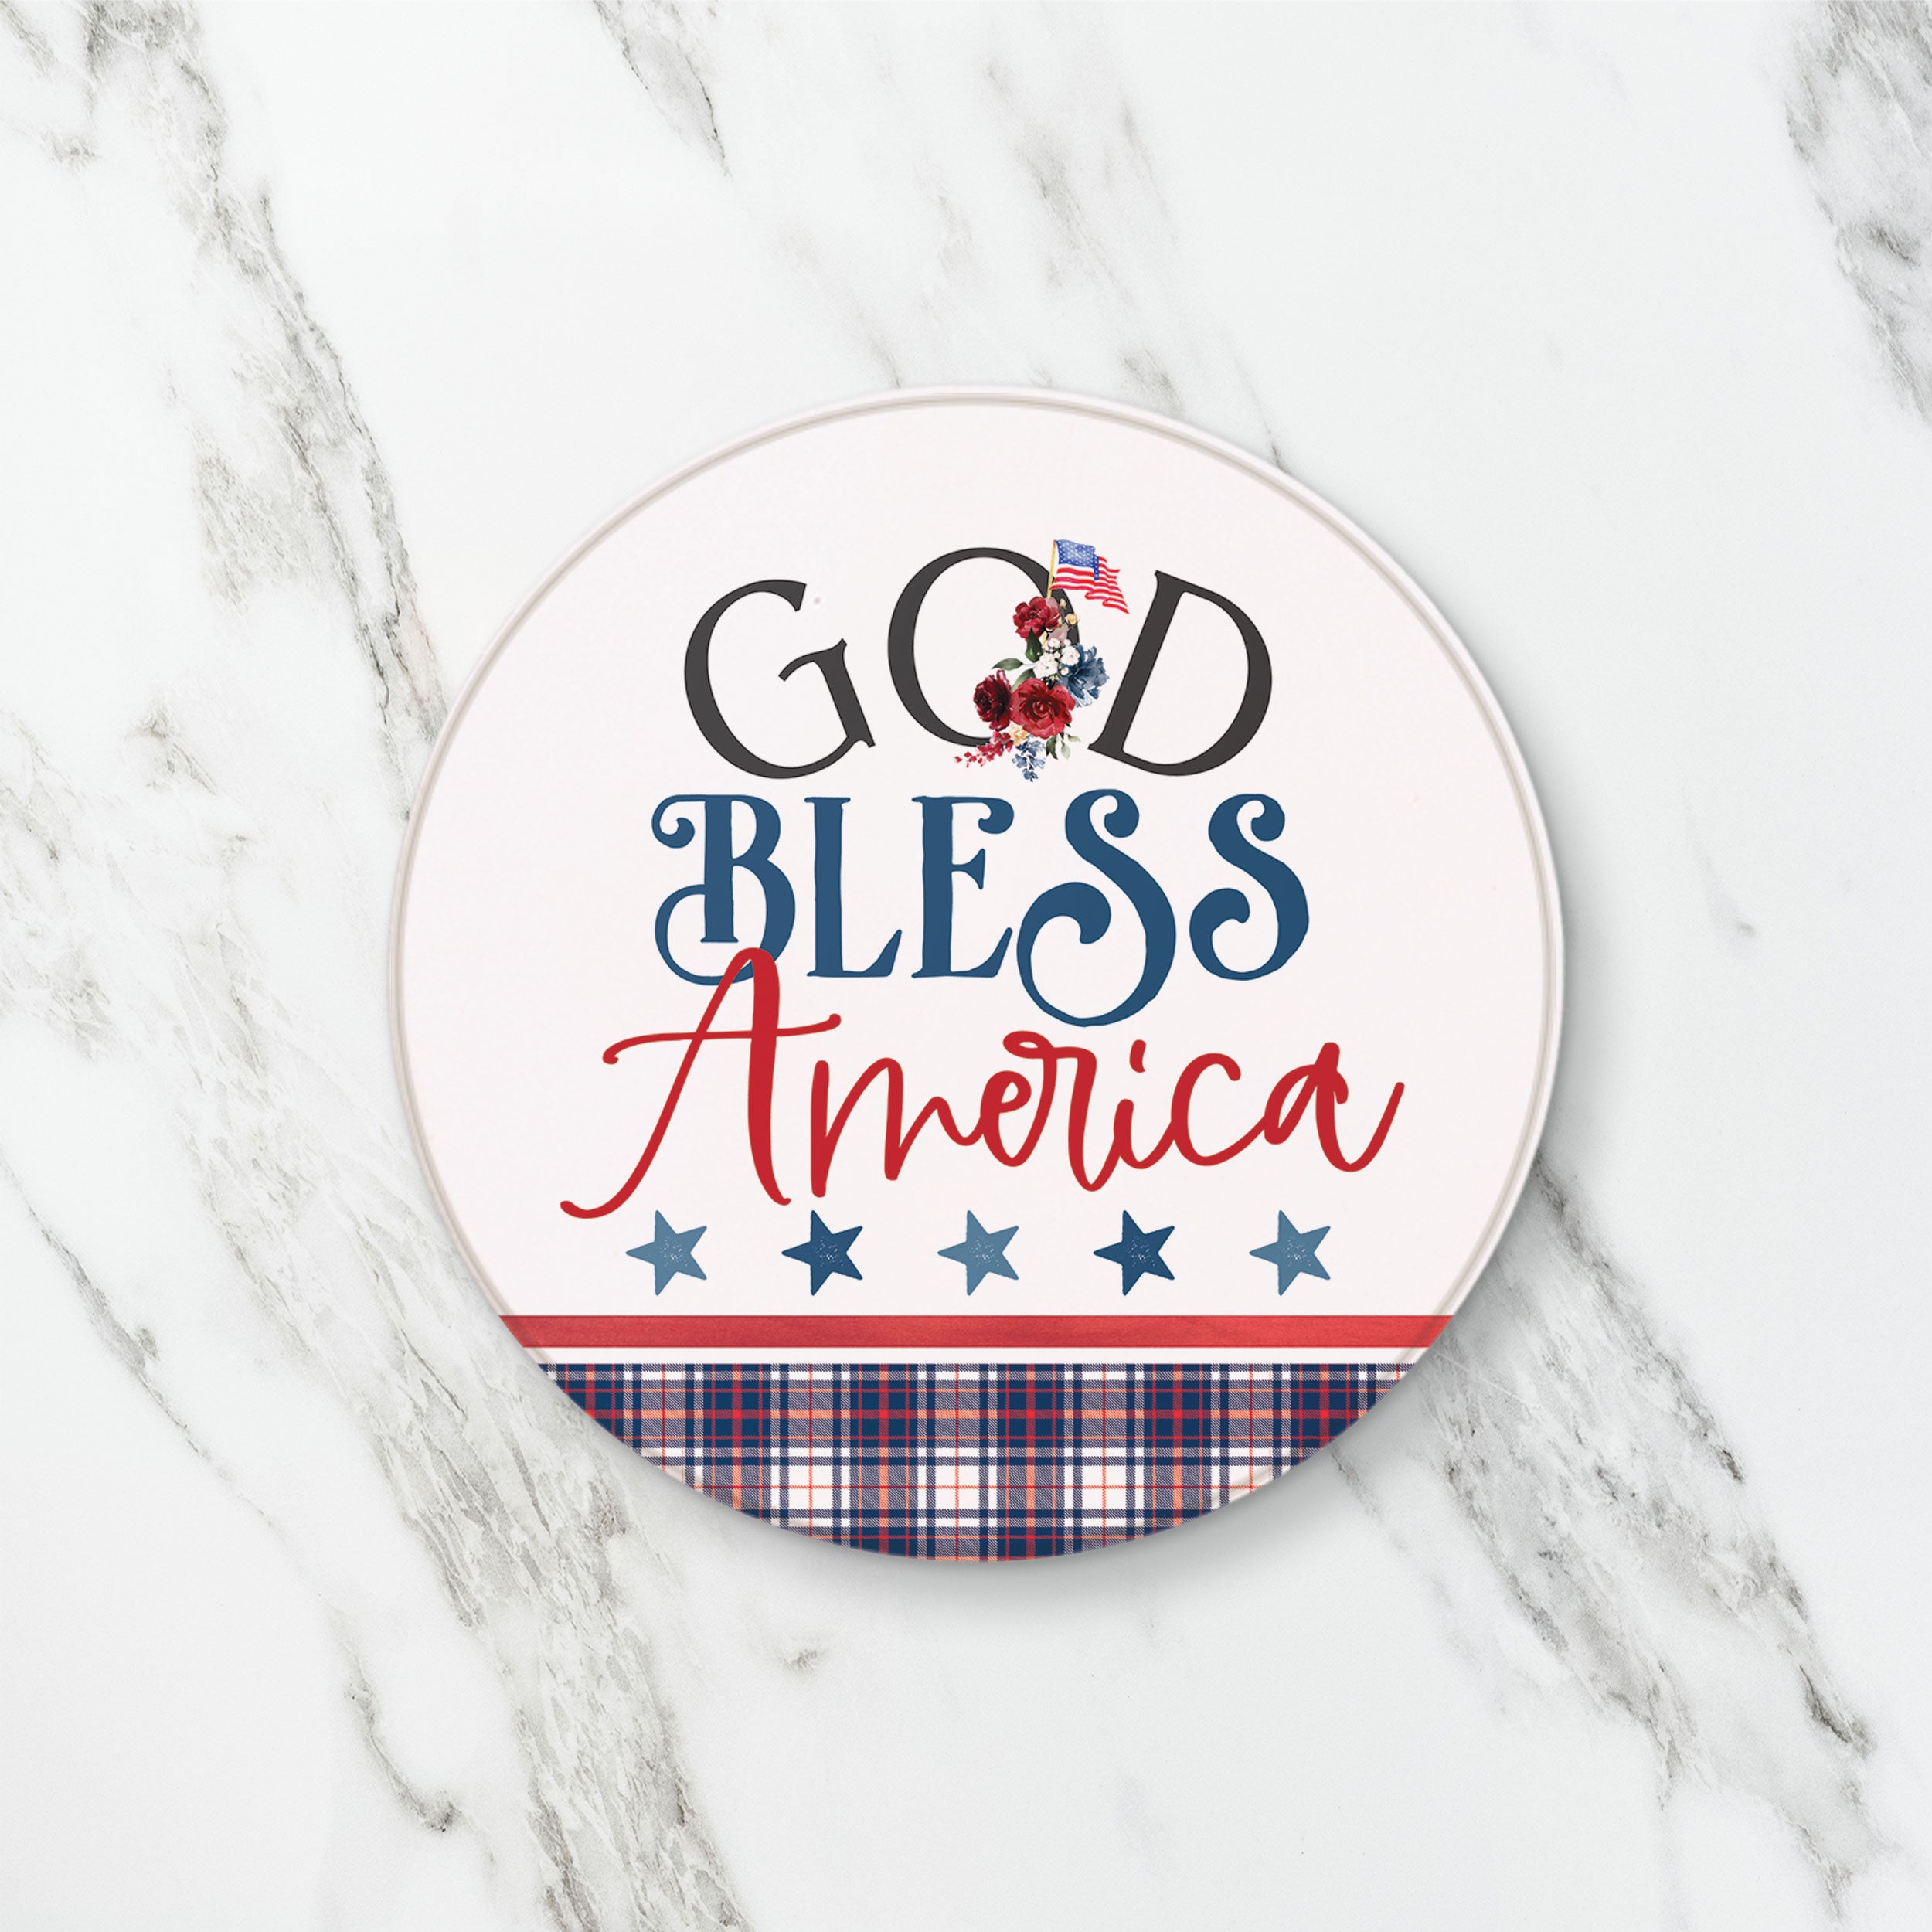 **My Home Sweet Home: God Bless America Round Coaster Set